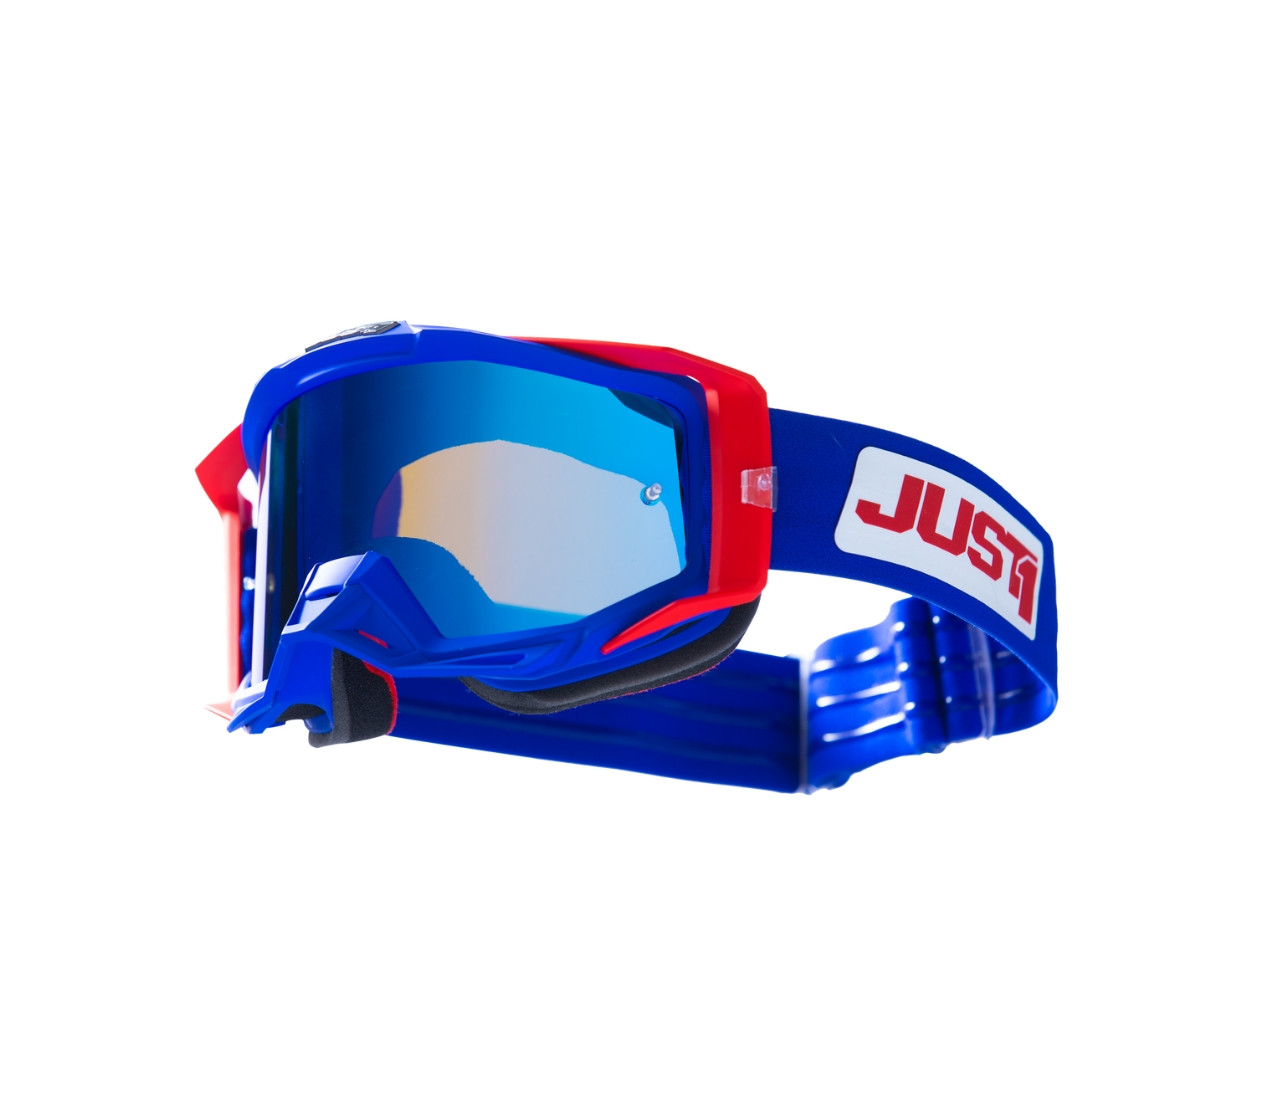 JUST1 GOGGLE IRIS 2.0 SUIT BLUE - RED - WHITE MIRROR BLUE LENS